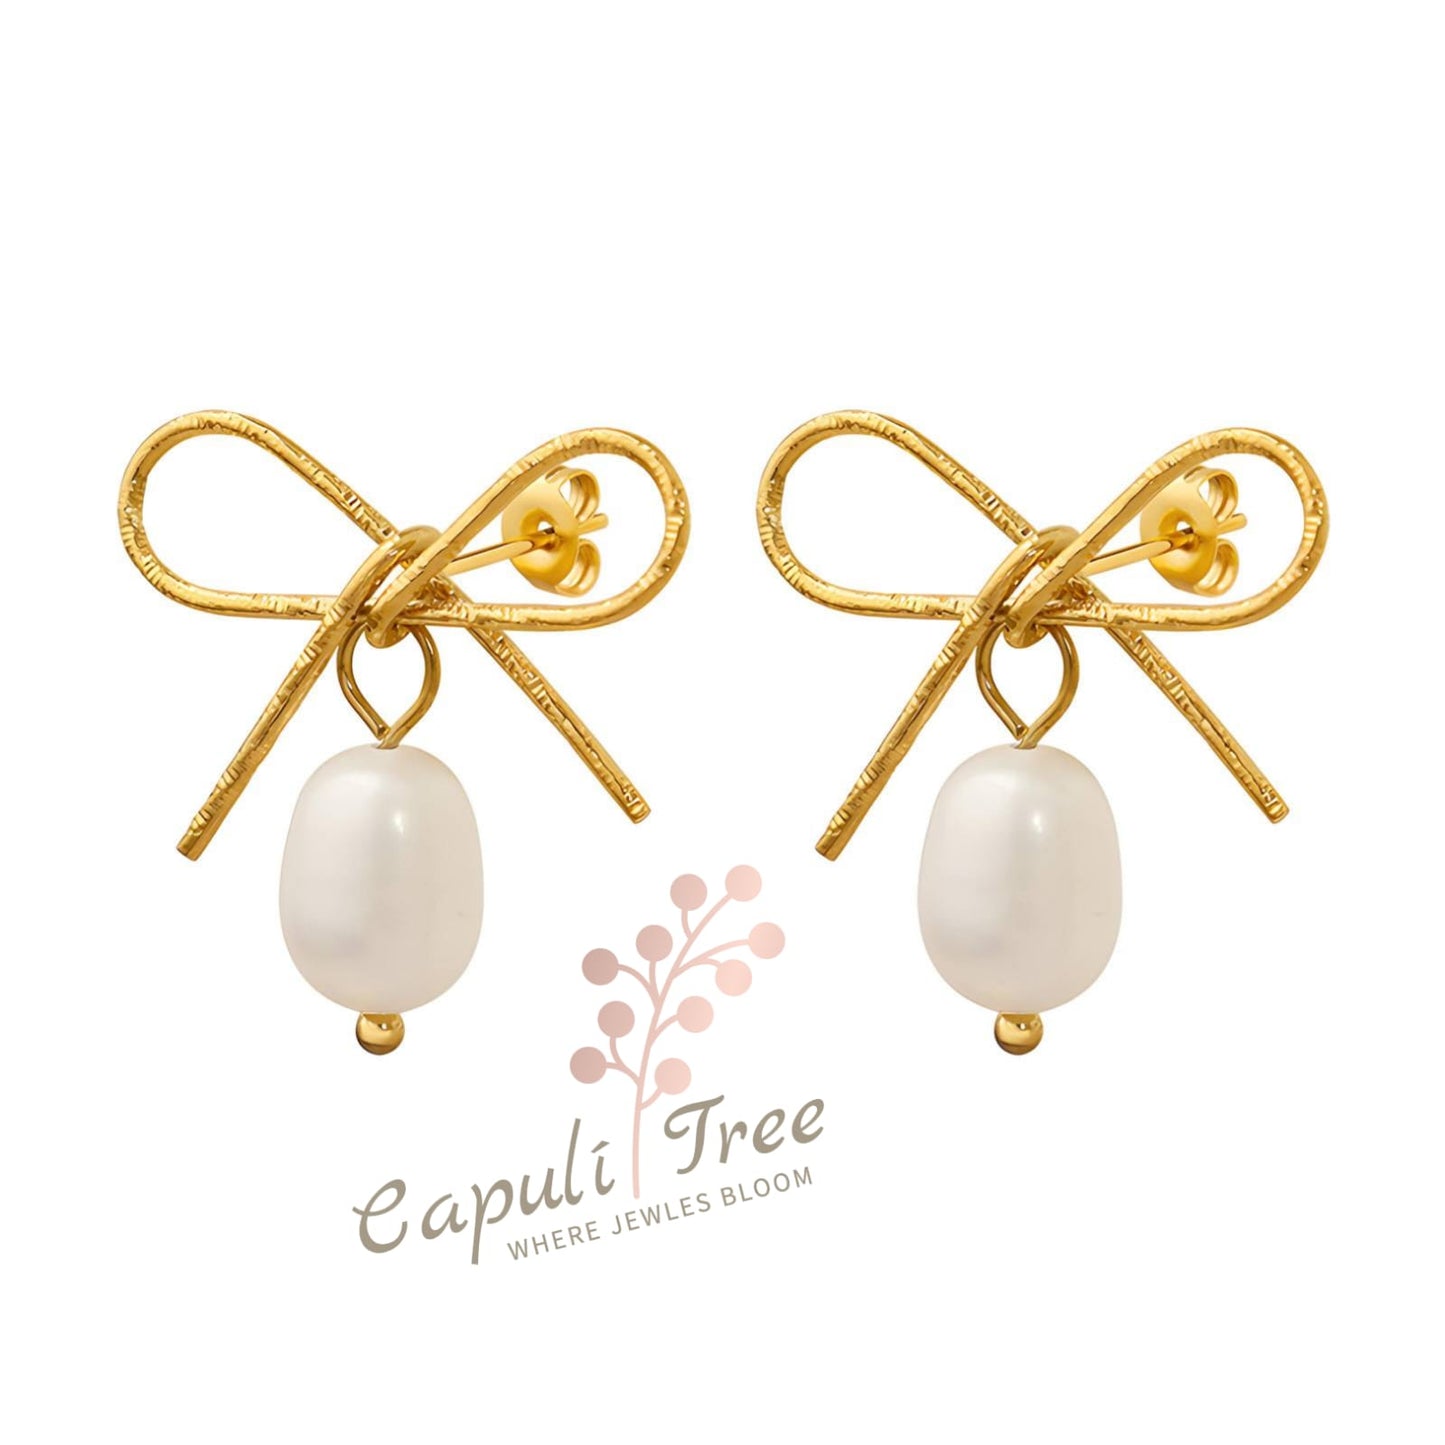 18K GOLD PLATED STAINLESS STEEL "BOWS" EARRINGS